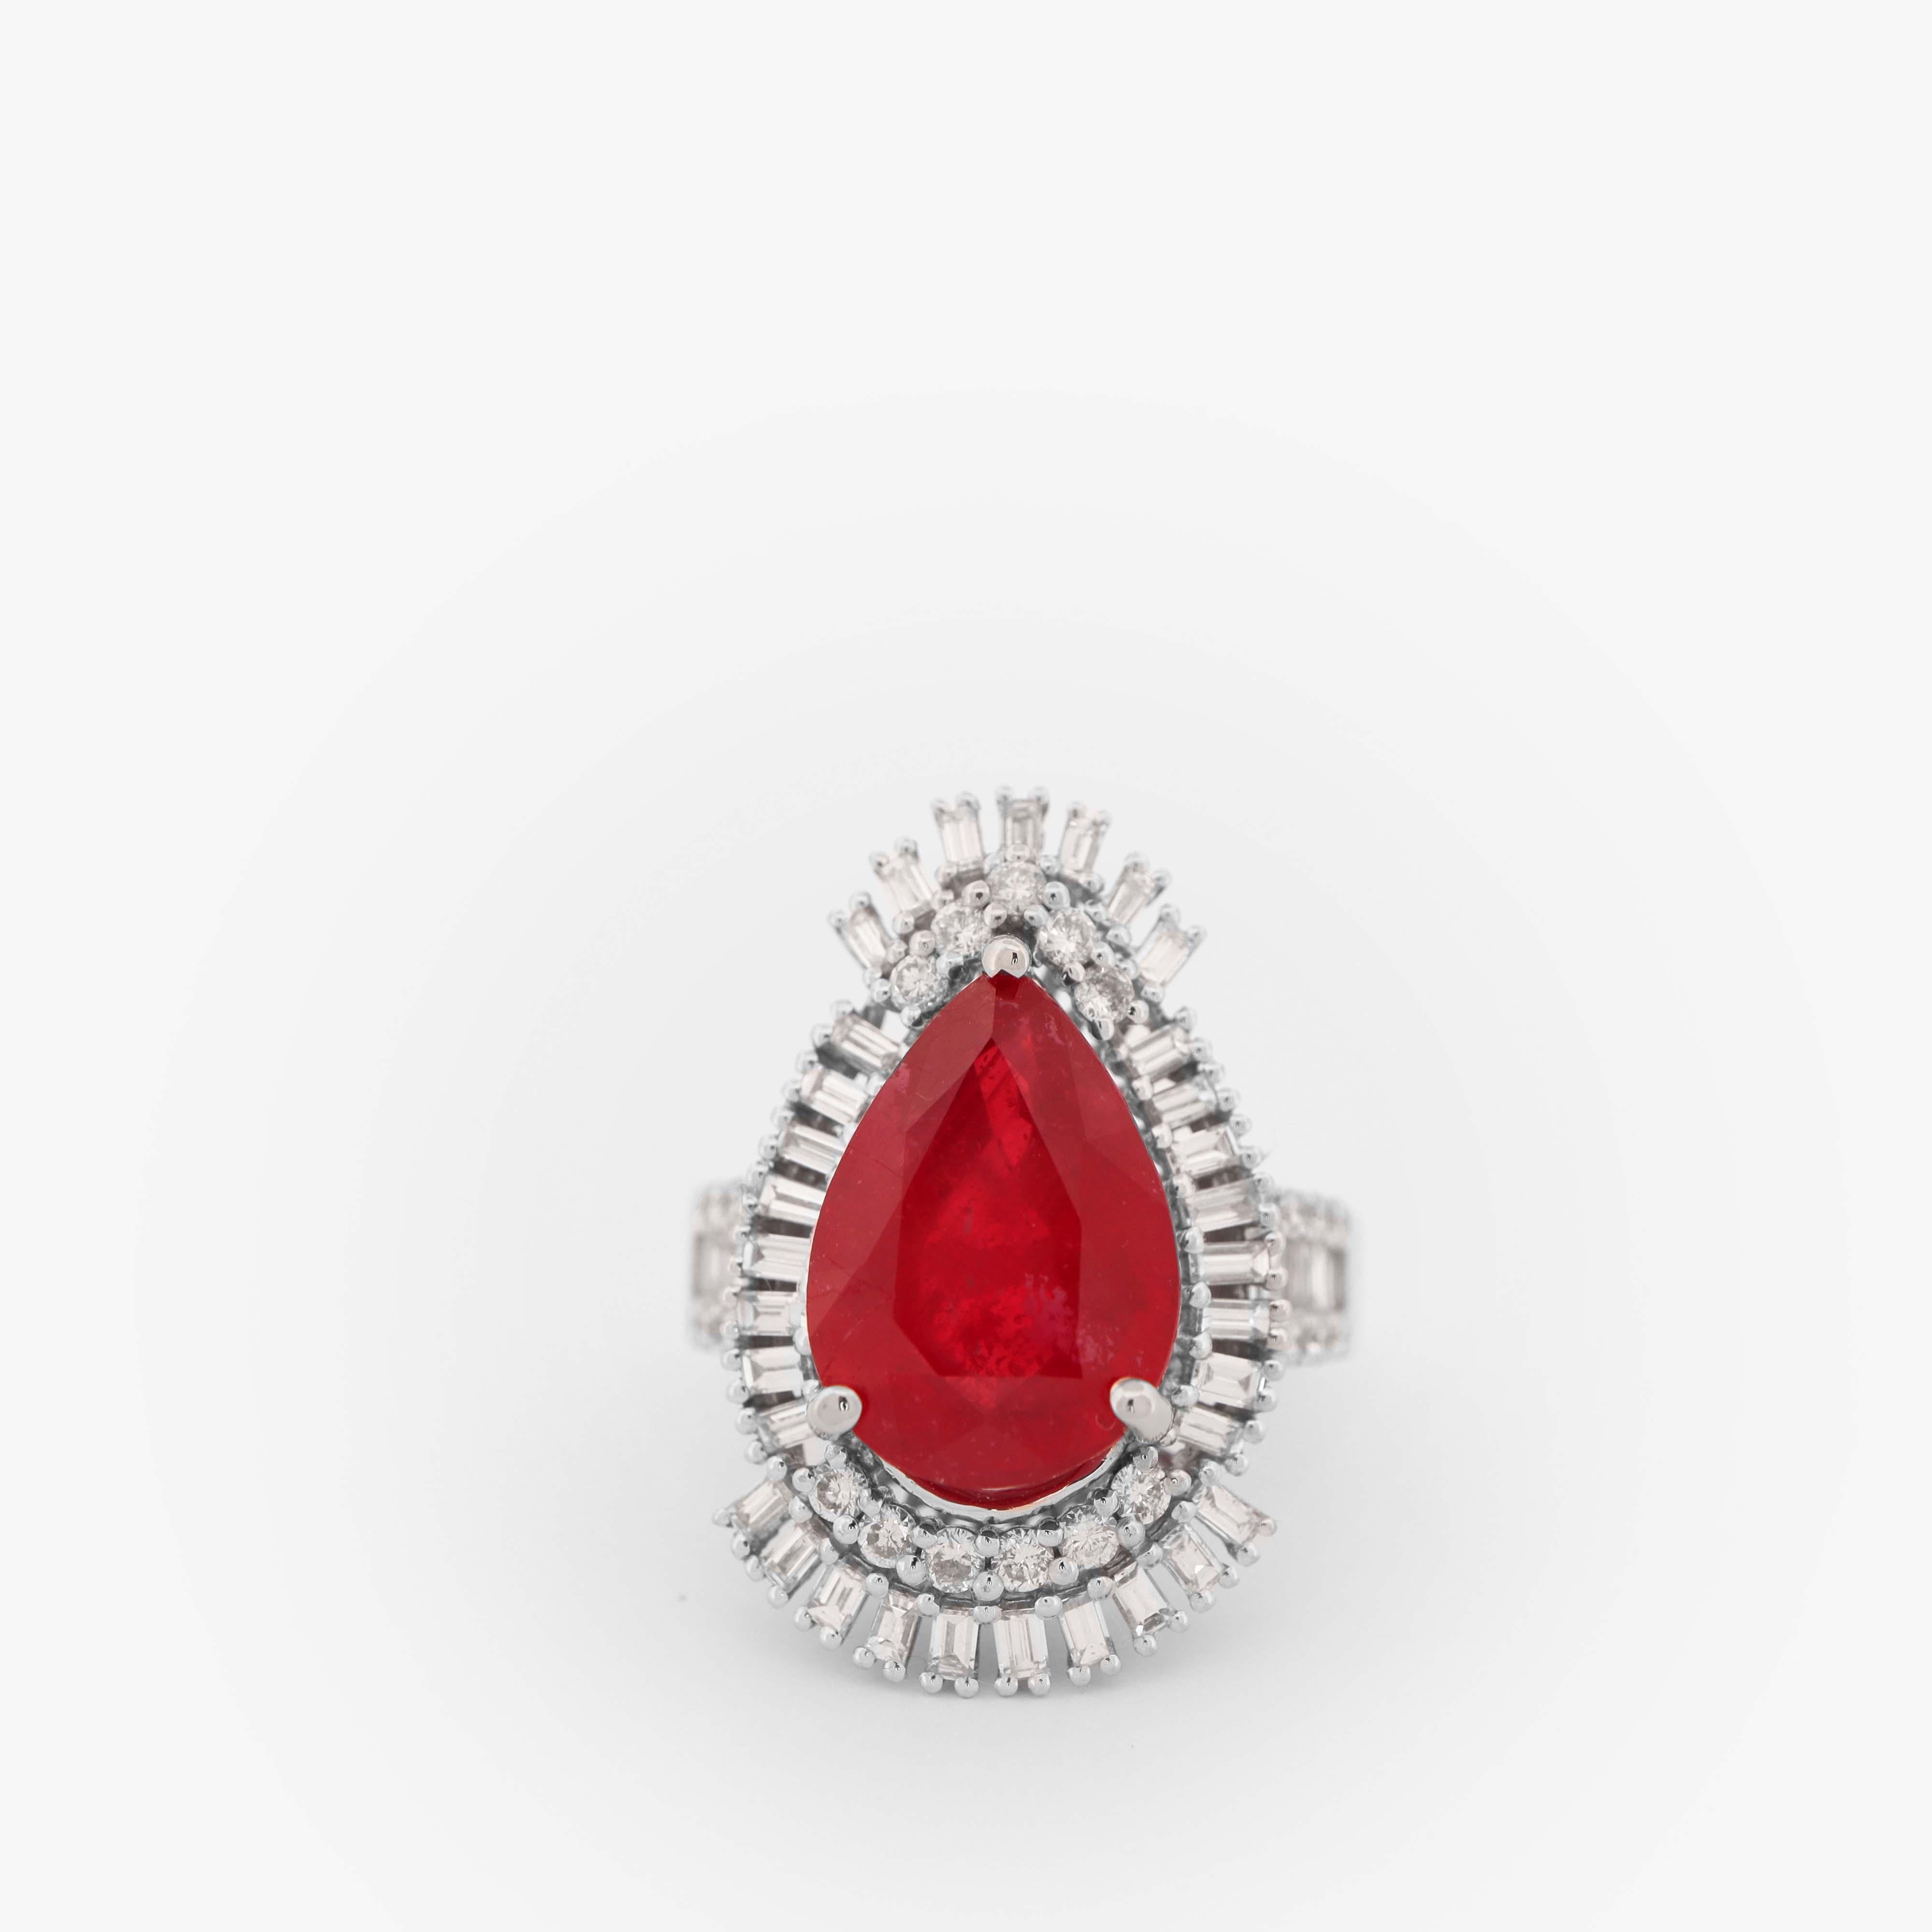 This 6.95 carat pear-shaped ruby and diamond cocktail ring, is inspired by the glamorous Art Deco era. The centerpiece of this ring is a vivid red pear-shaped ruby, weighing in at an impressive 6.95 carats, making it a true statement piece.